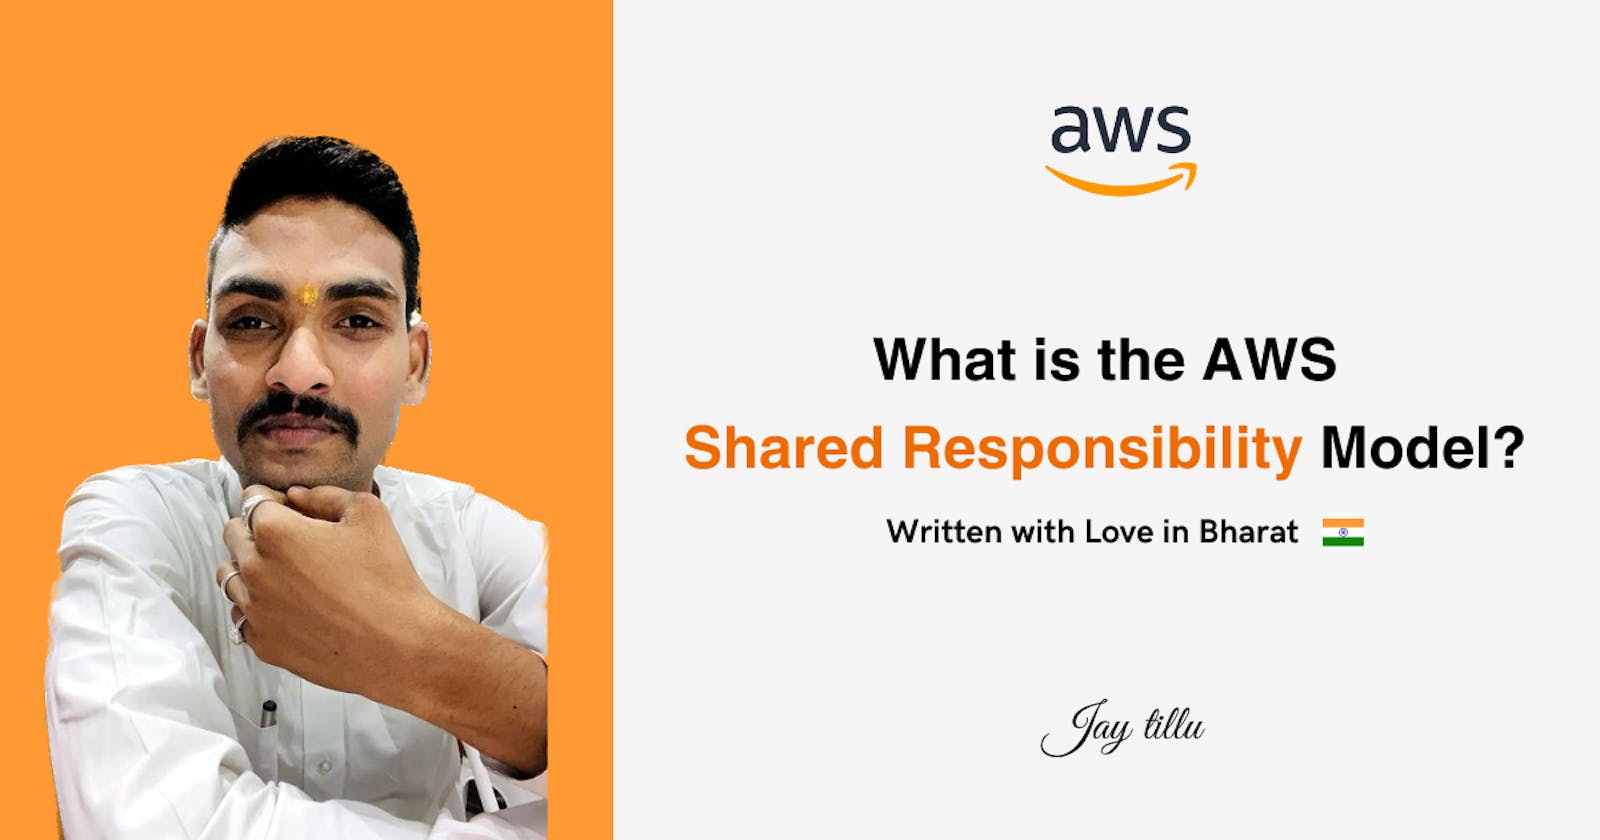 What is the AWS Shared Responsibility Model?